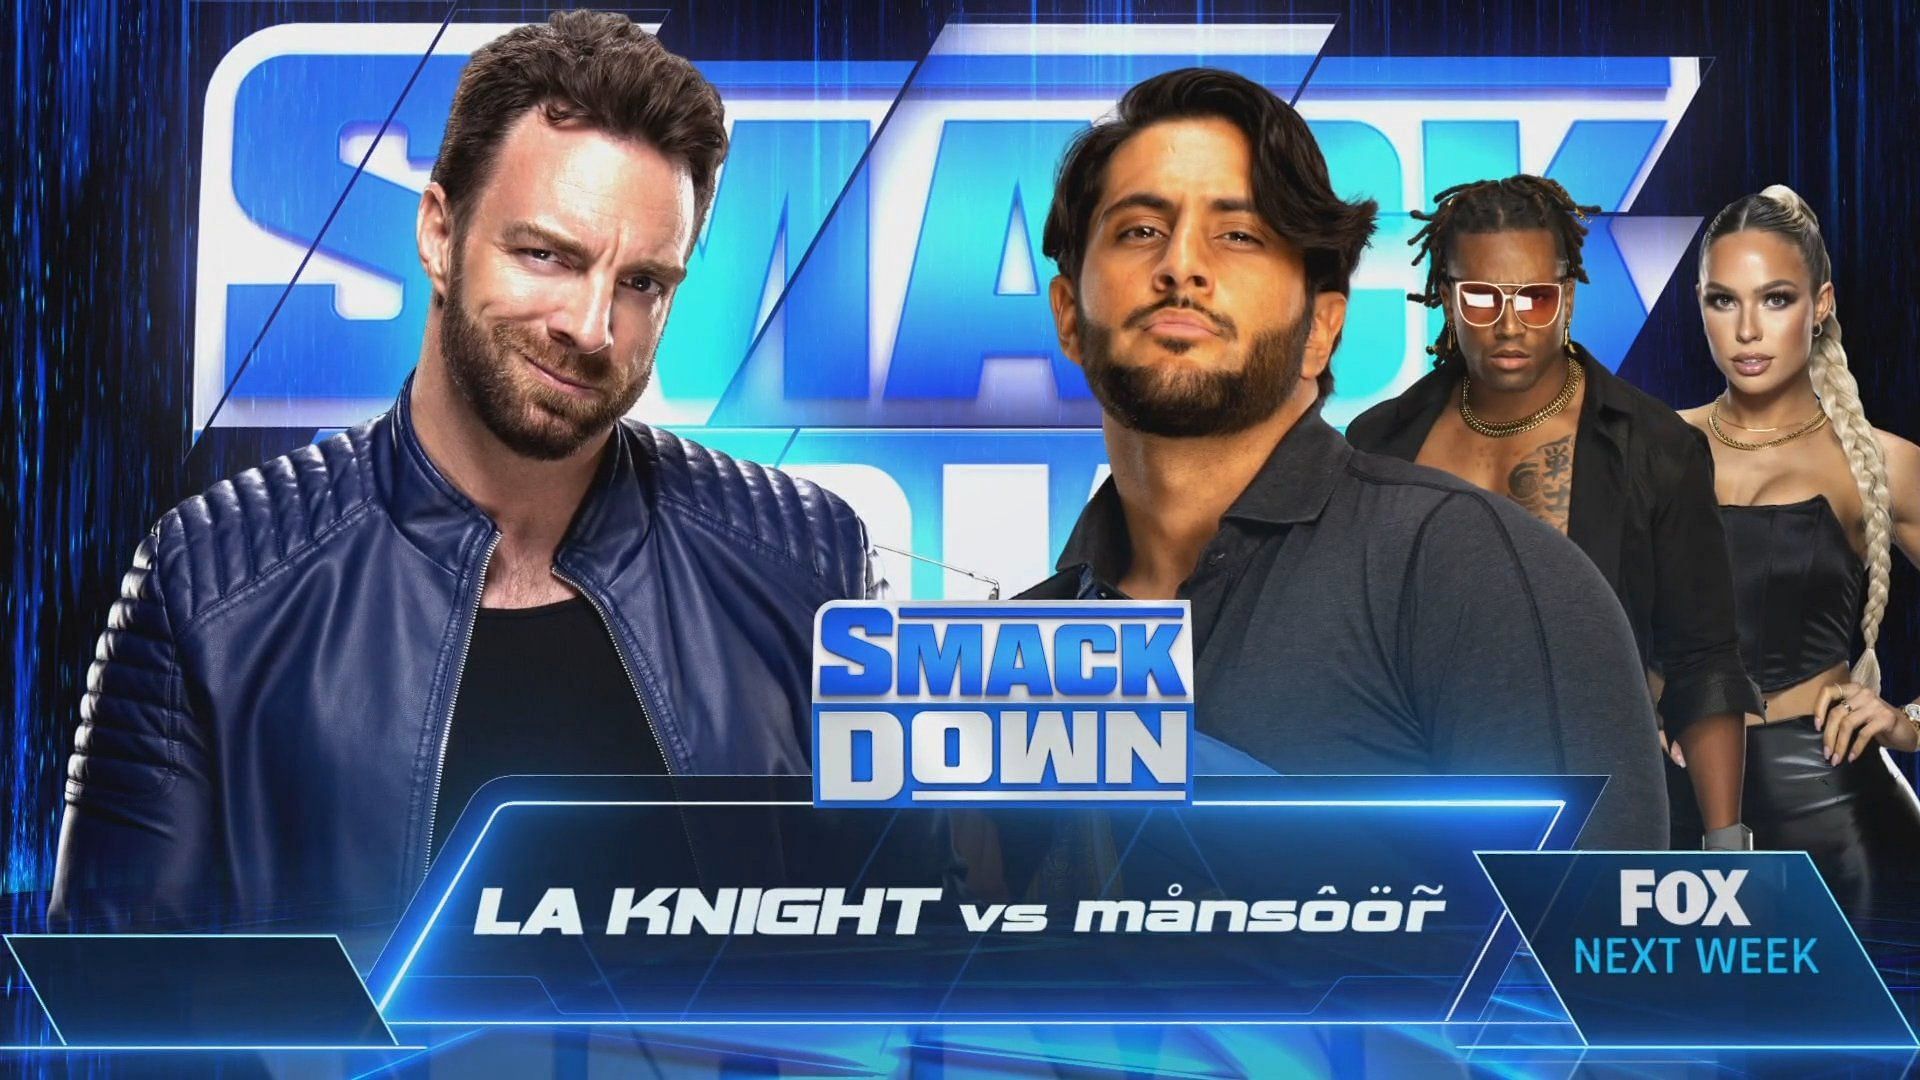 LA Knight will wrestle his first main roster match next week